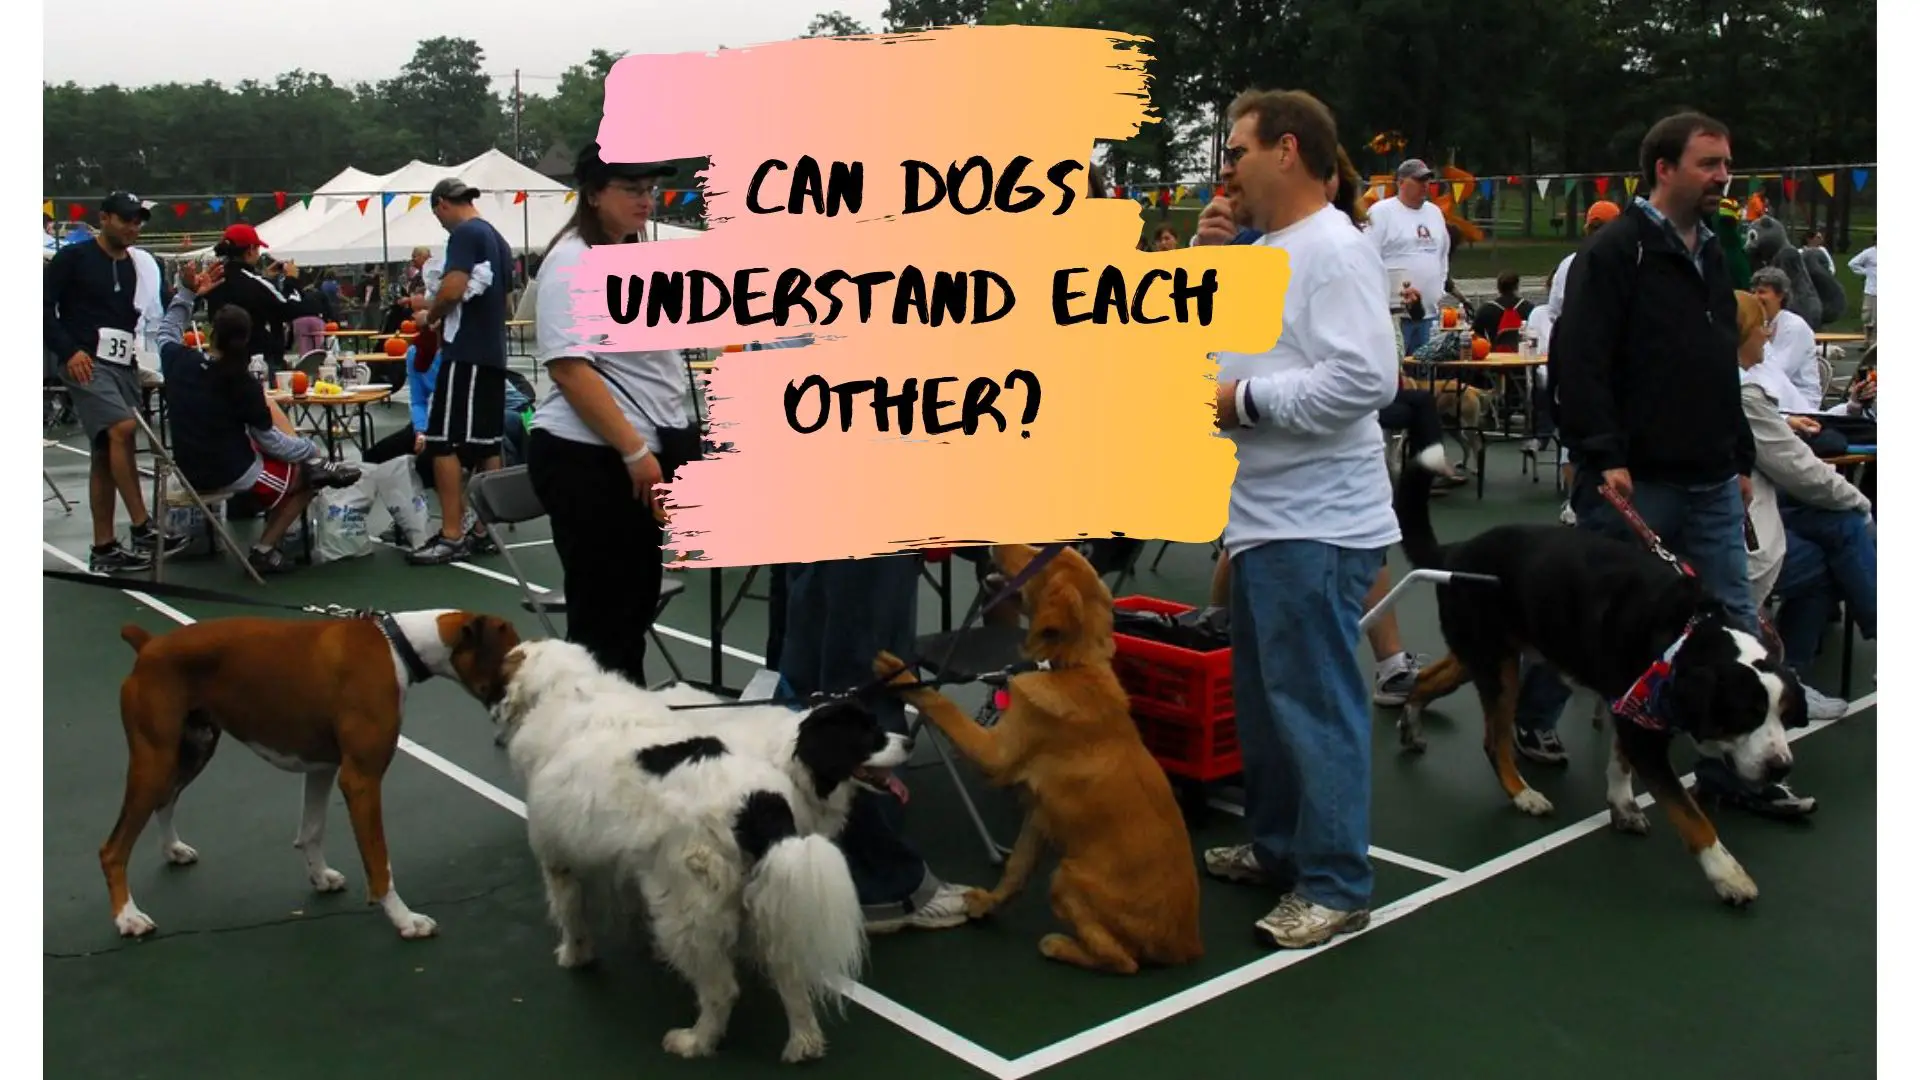 Can Dogs Understand Each Other?